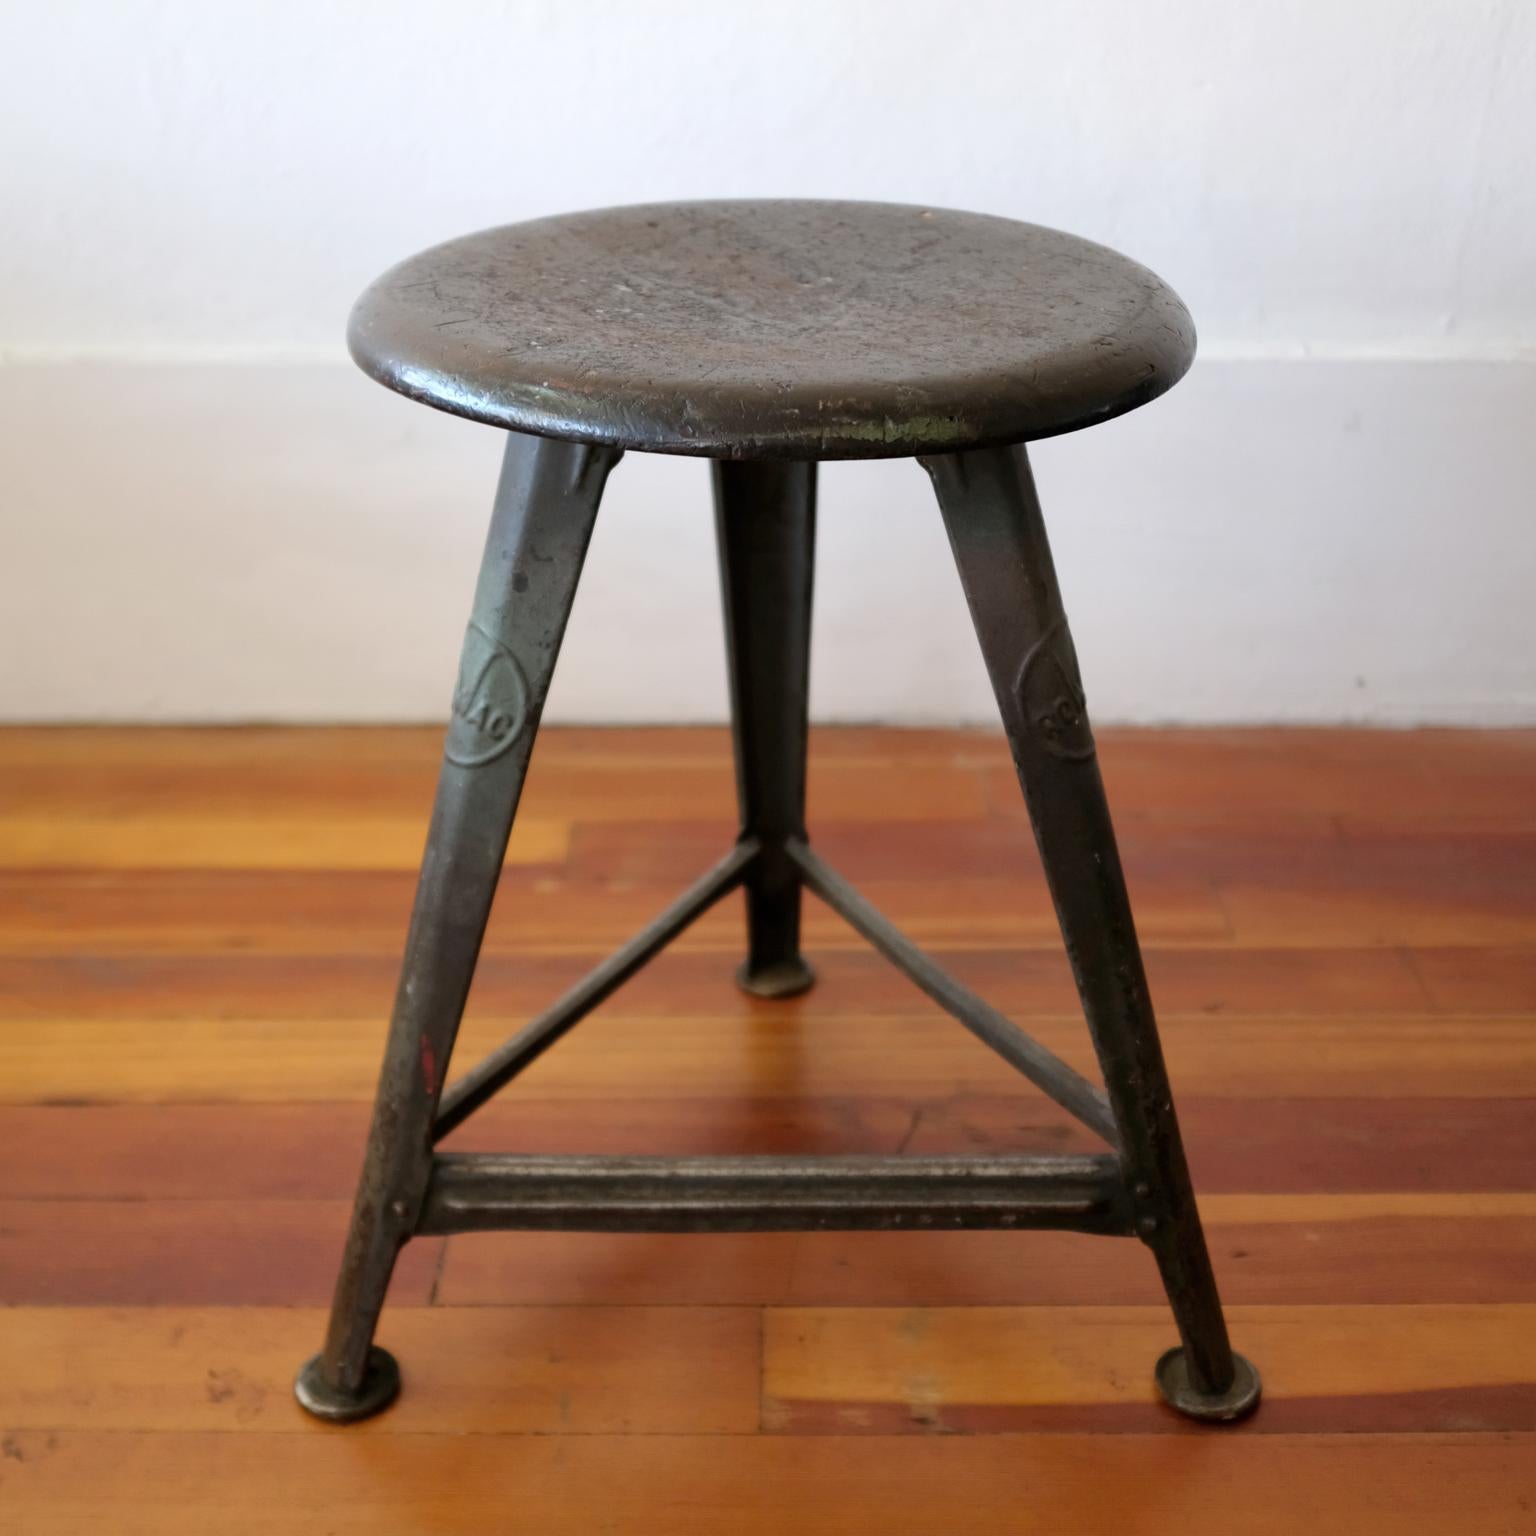 Rowac industrial stool designed by Robert Wagner Chemnitz. They were used extensively in the classrooms and workshops at the Bauhaus. Beautiful original patina. Stamped Rowac in the metal frame and 